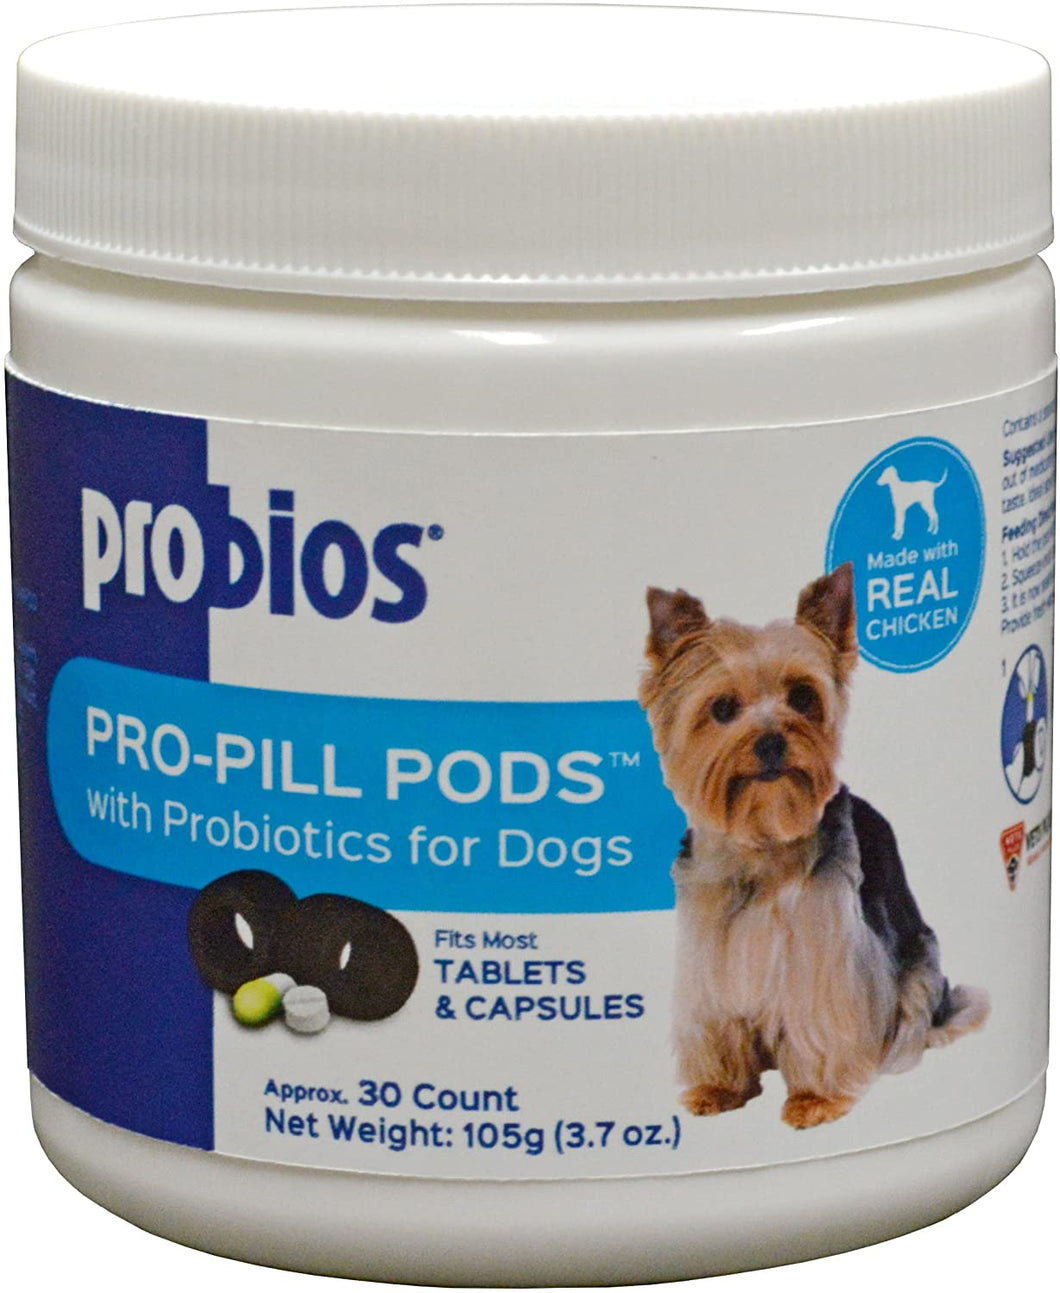 Probios Pro-Pill Pods Peanut Butter Flavored 30 count